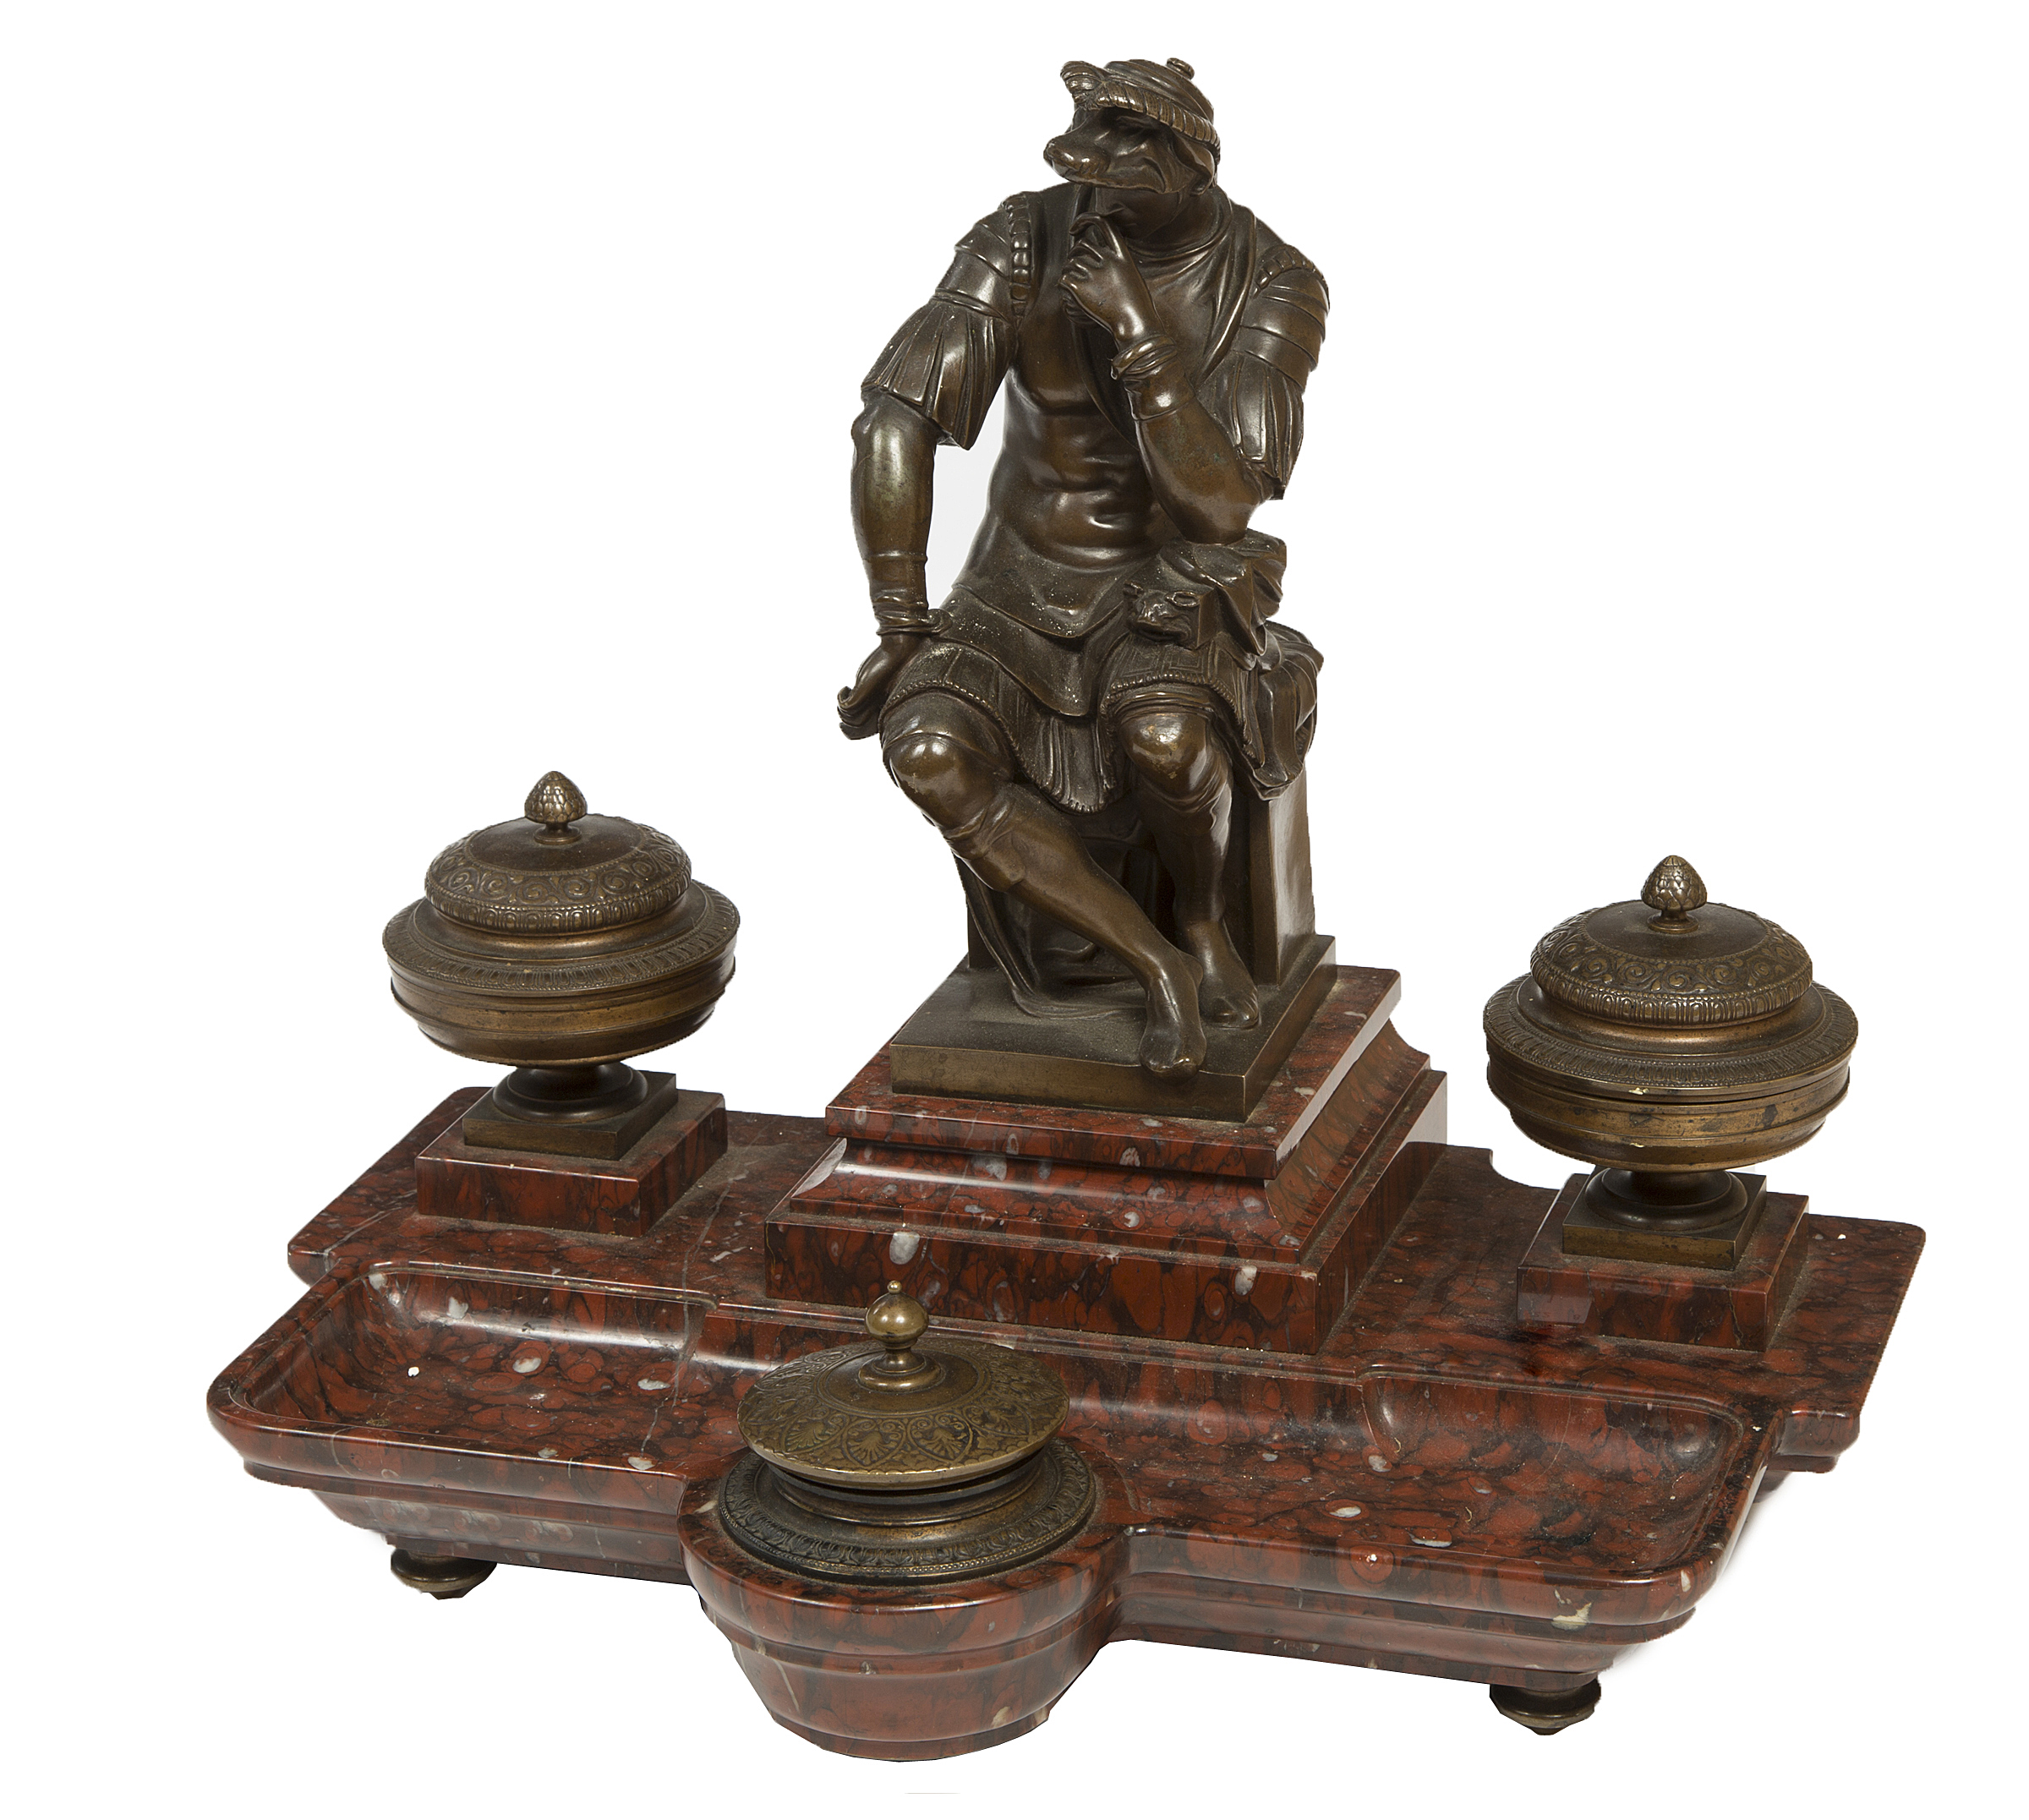 A FINE FRENCH BRONZE AND GRIOTTE D'ITALIE MARBLE DESK STAND, late 19th century,